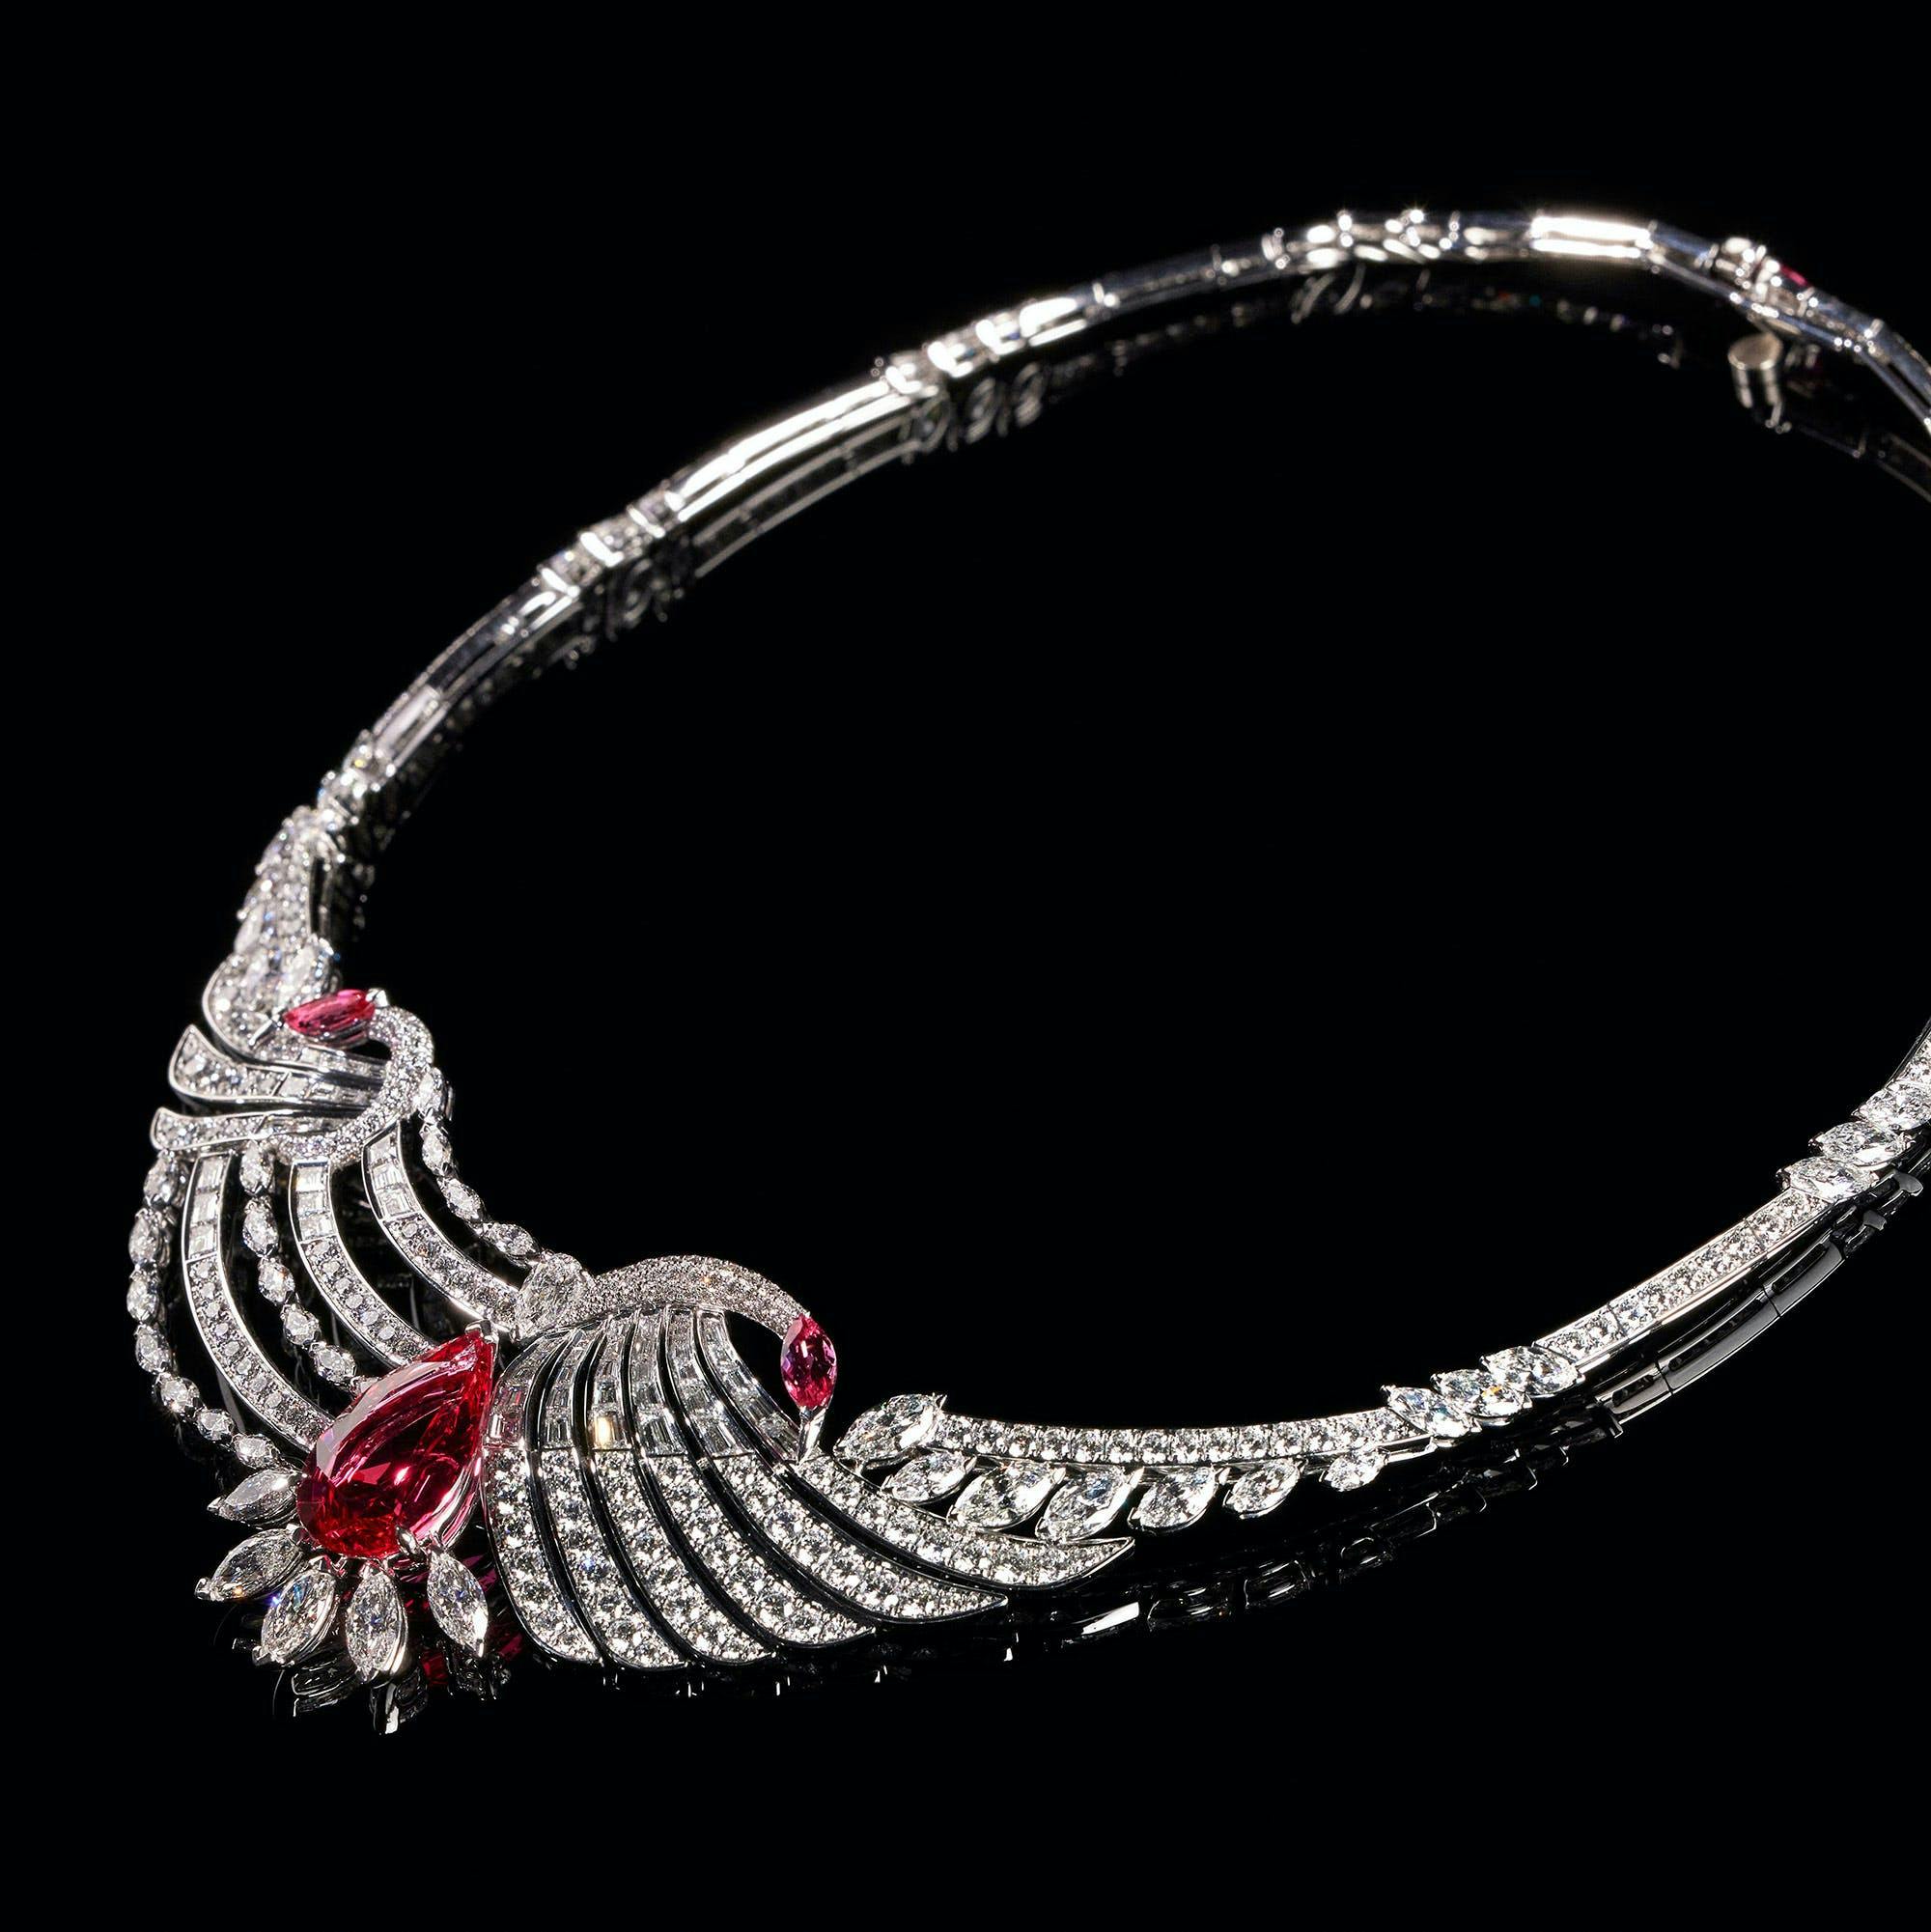 Piaget high jewelry necklace against black background.